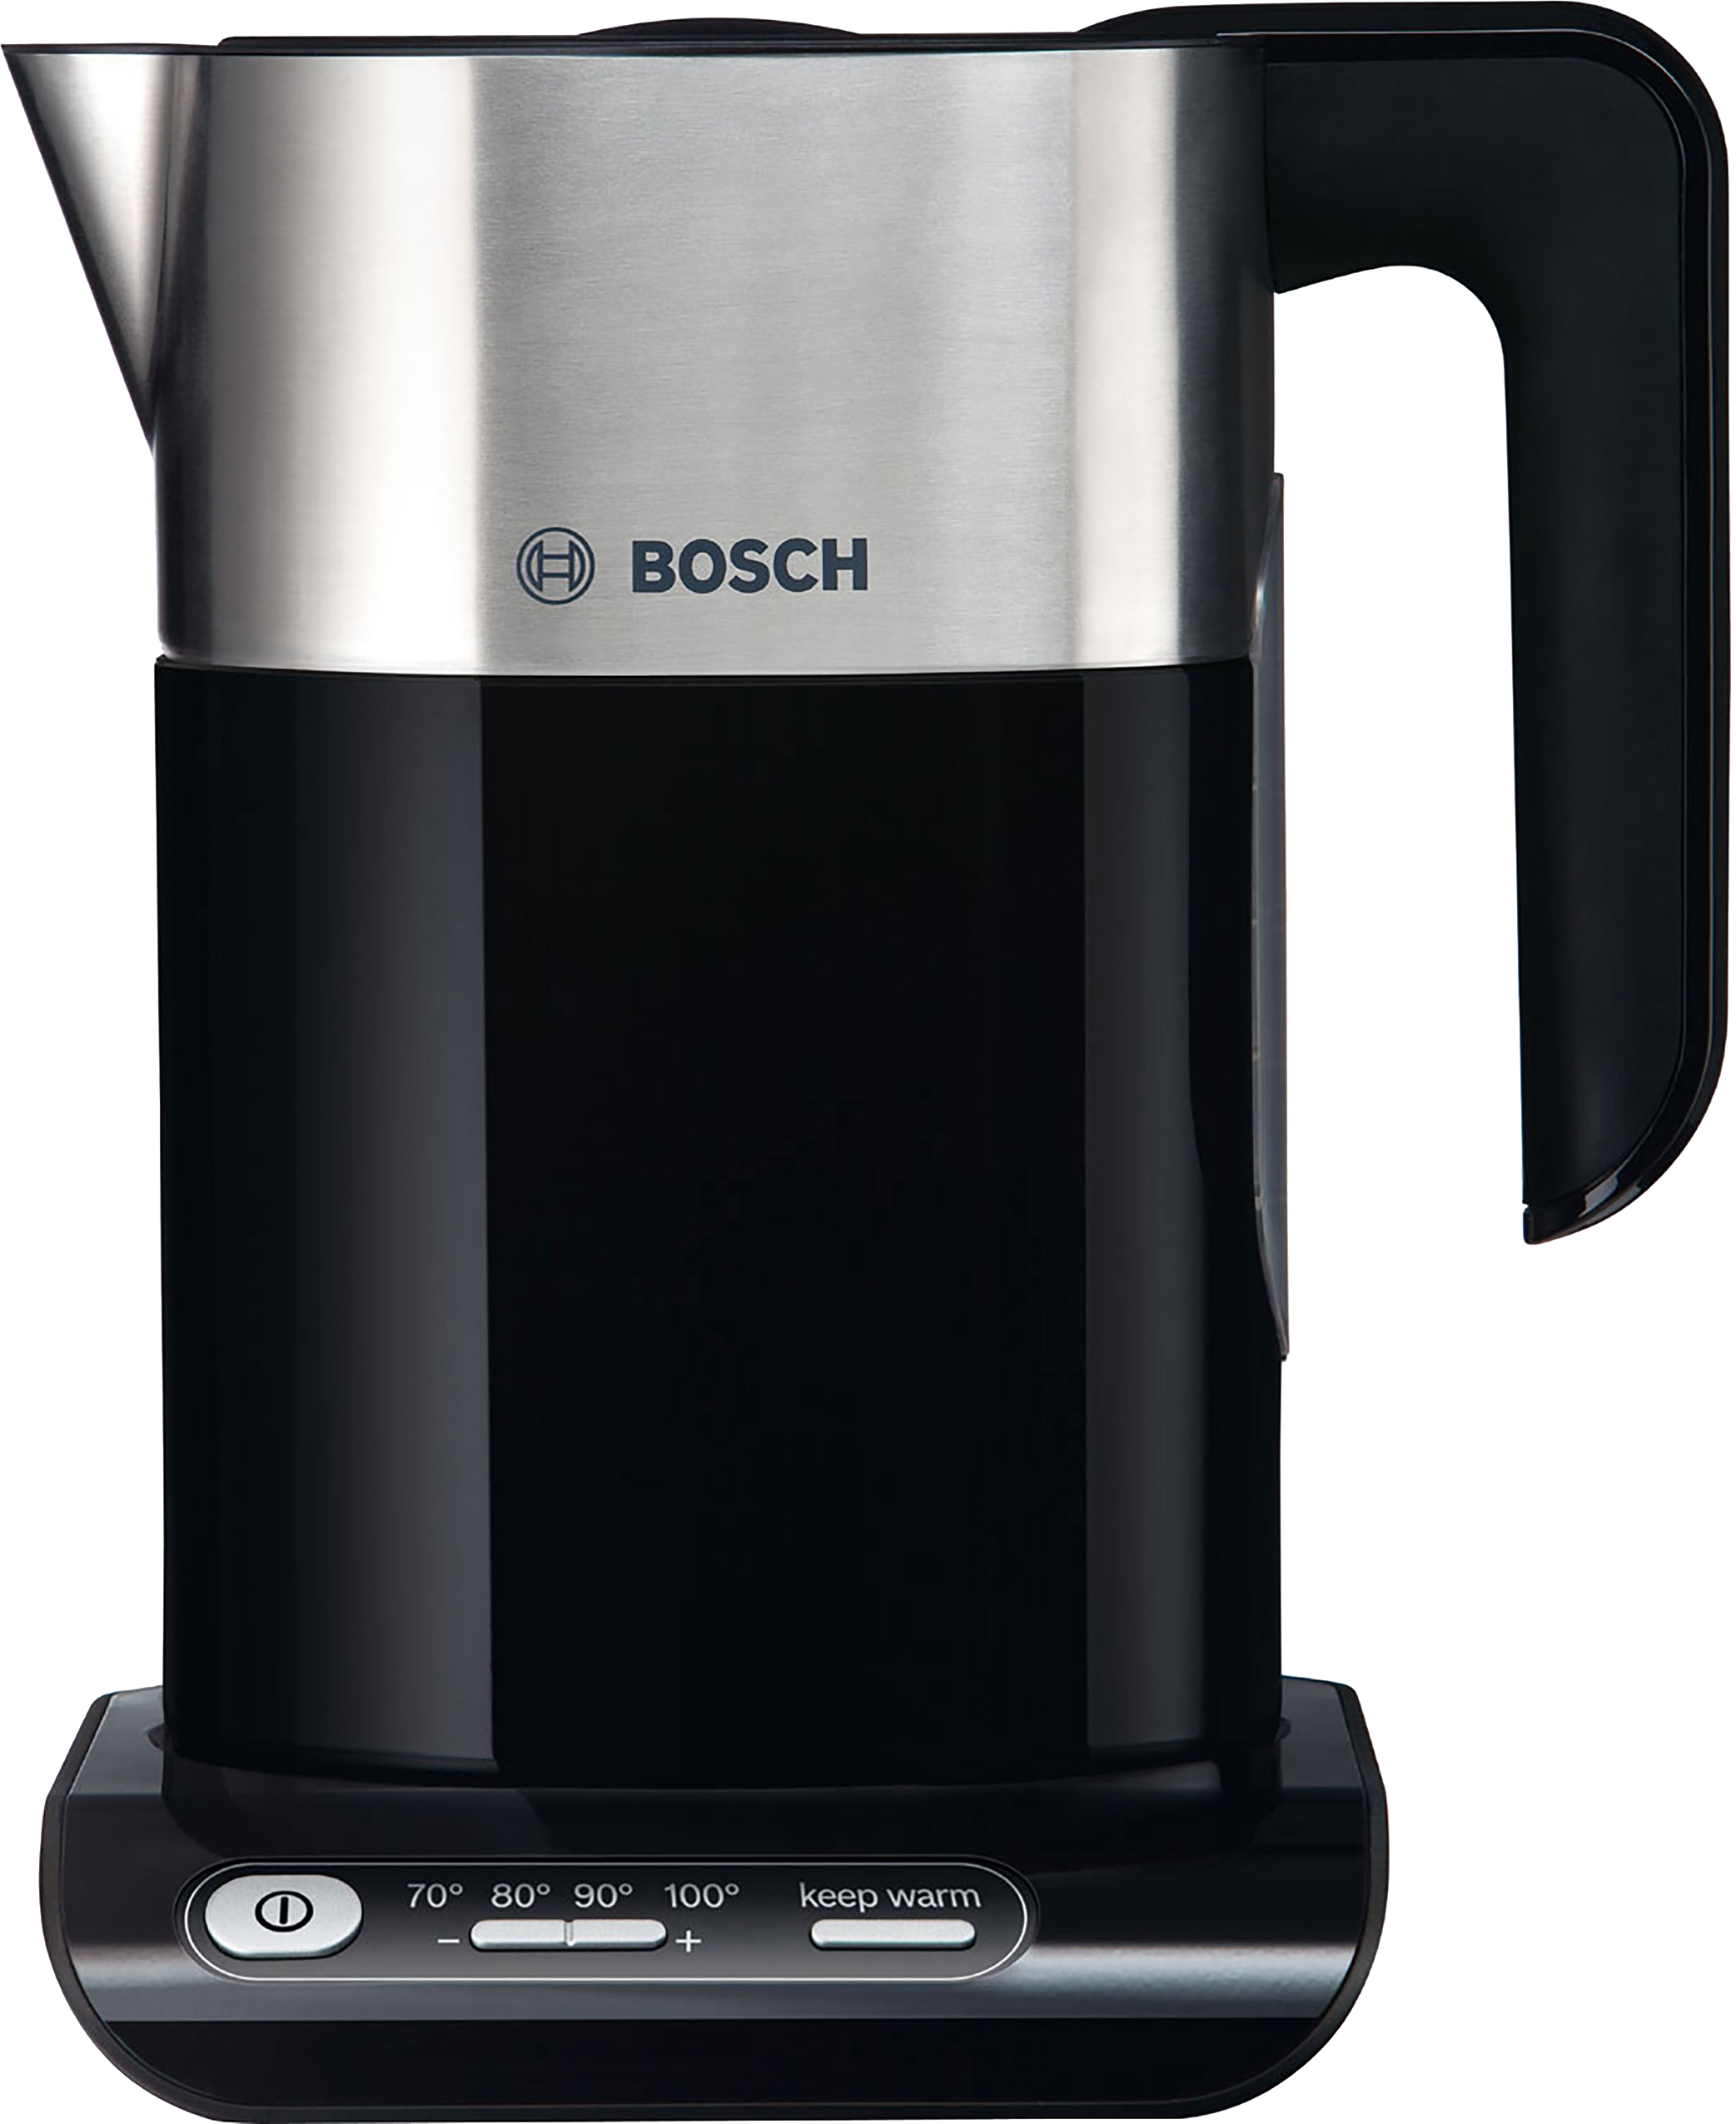 Bosch Styline TWK8633GB Kettle with Temperature Selector - Black / Stainless Steel, Black